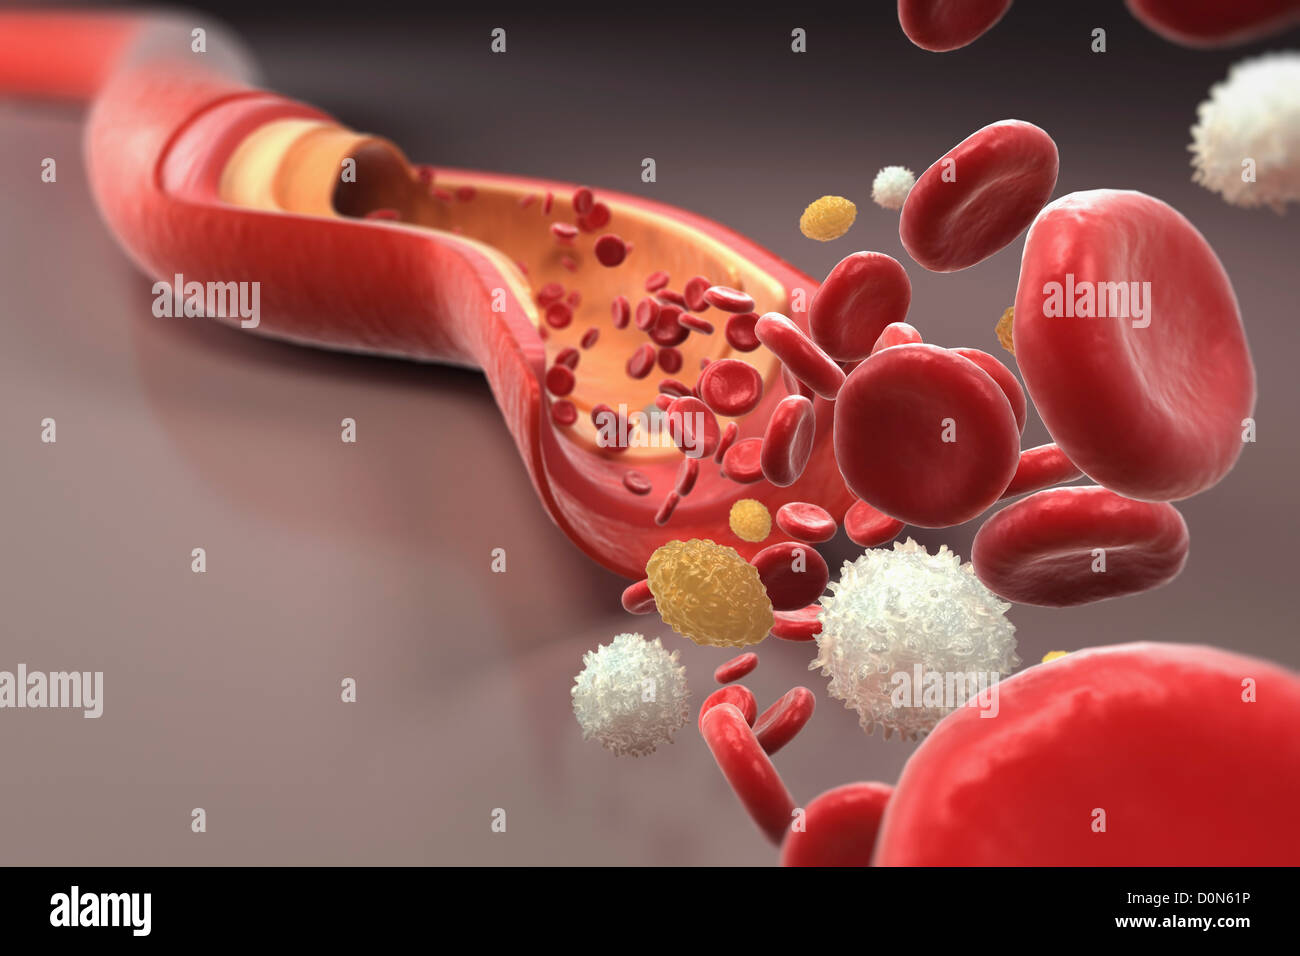 A section of a blood vessel with blood cells rushing towards the foreground. Stock Photo